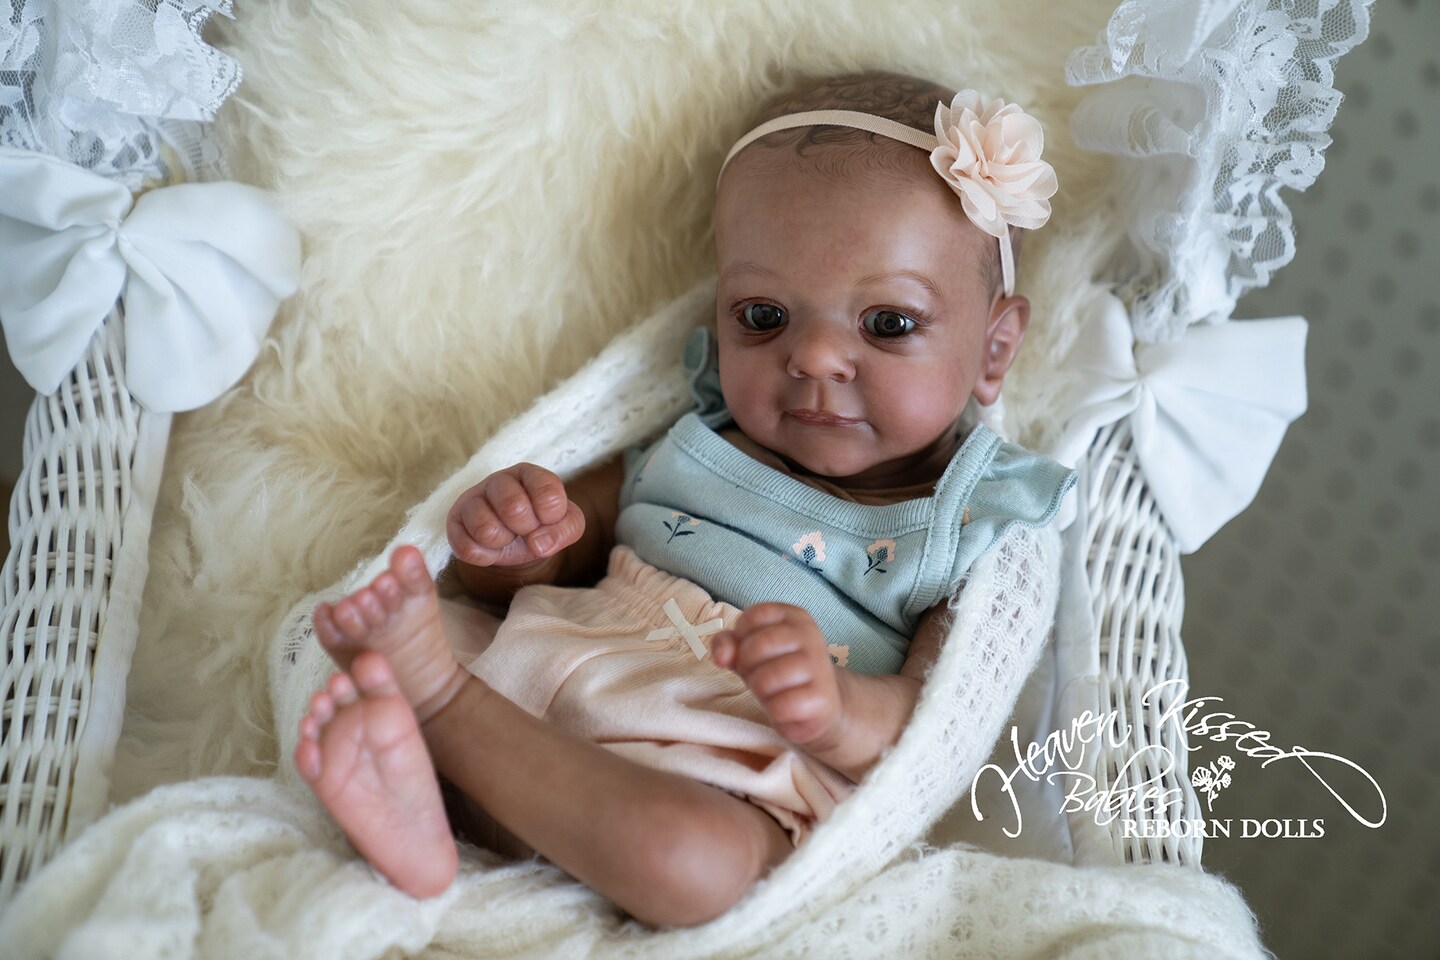 Felicia by Picket Fence Babies on Reborns